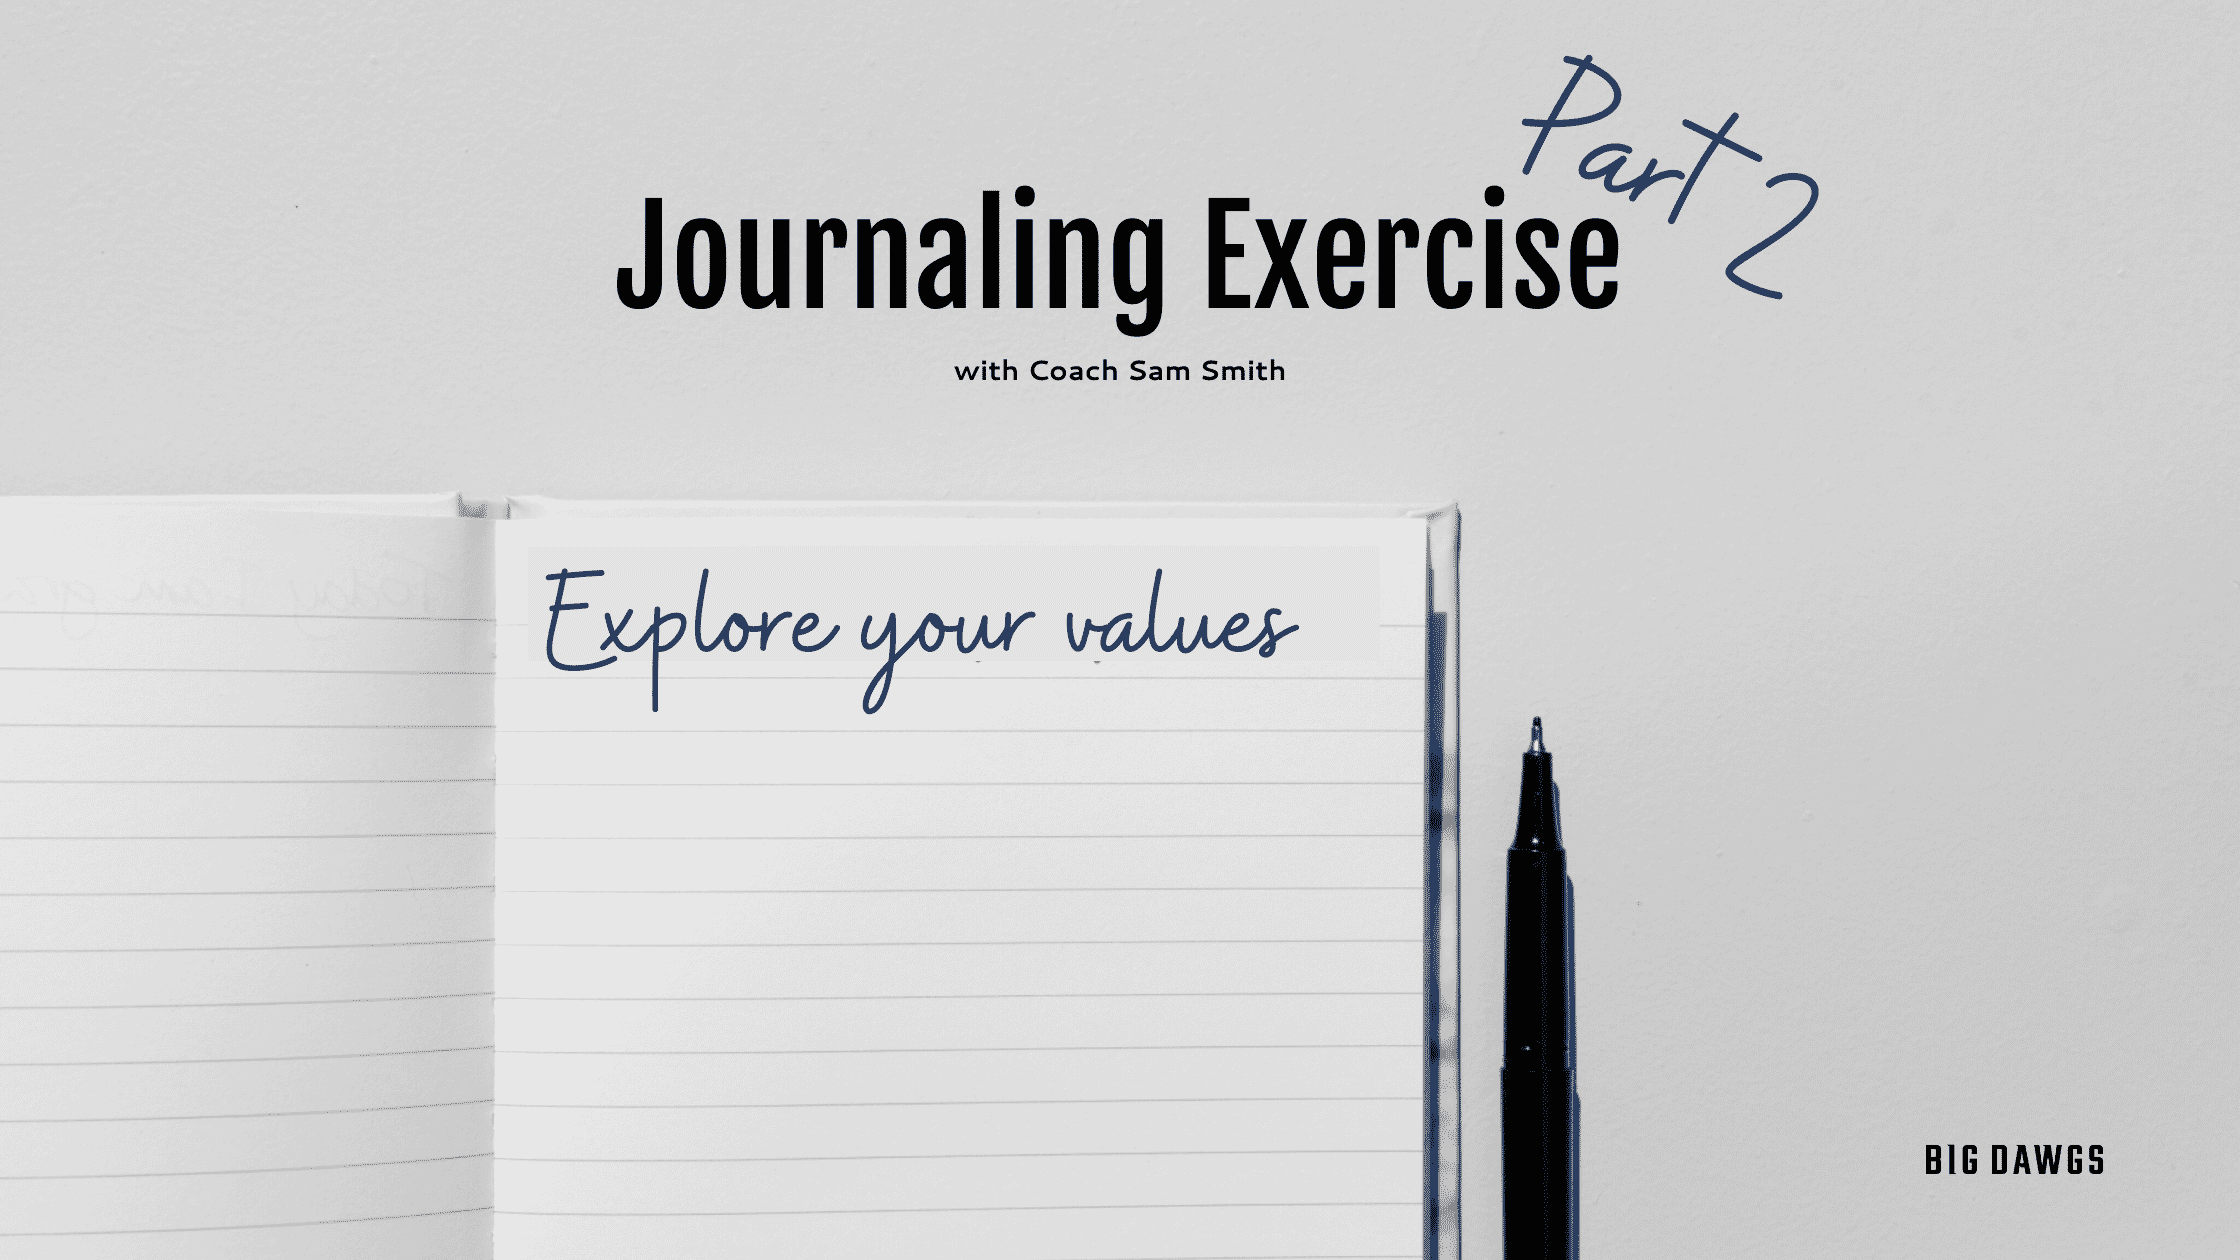 Journaling Exercise - exploring values